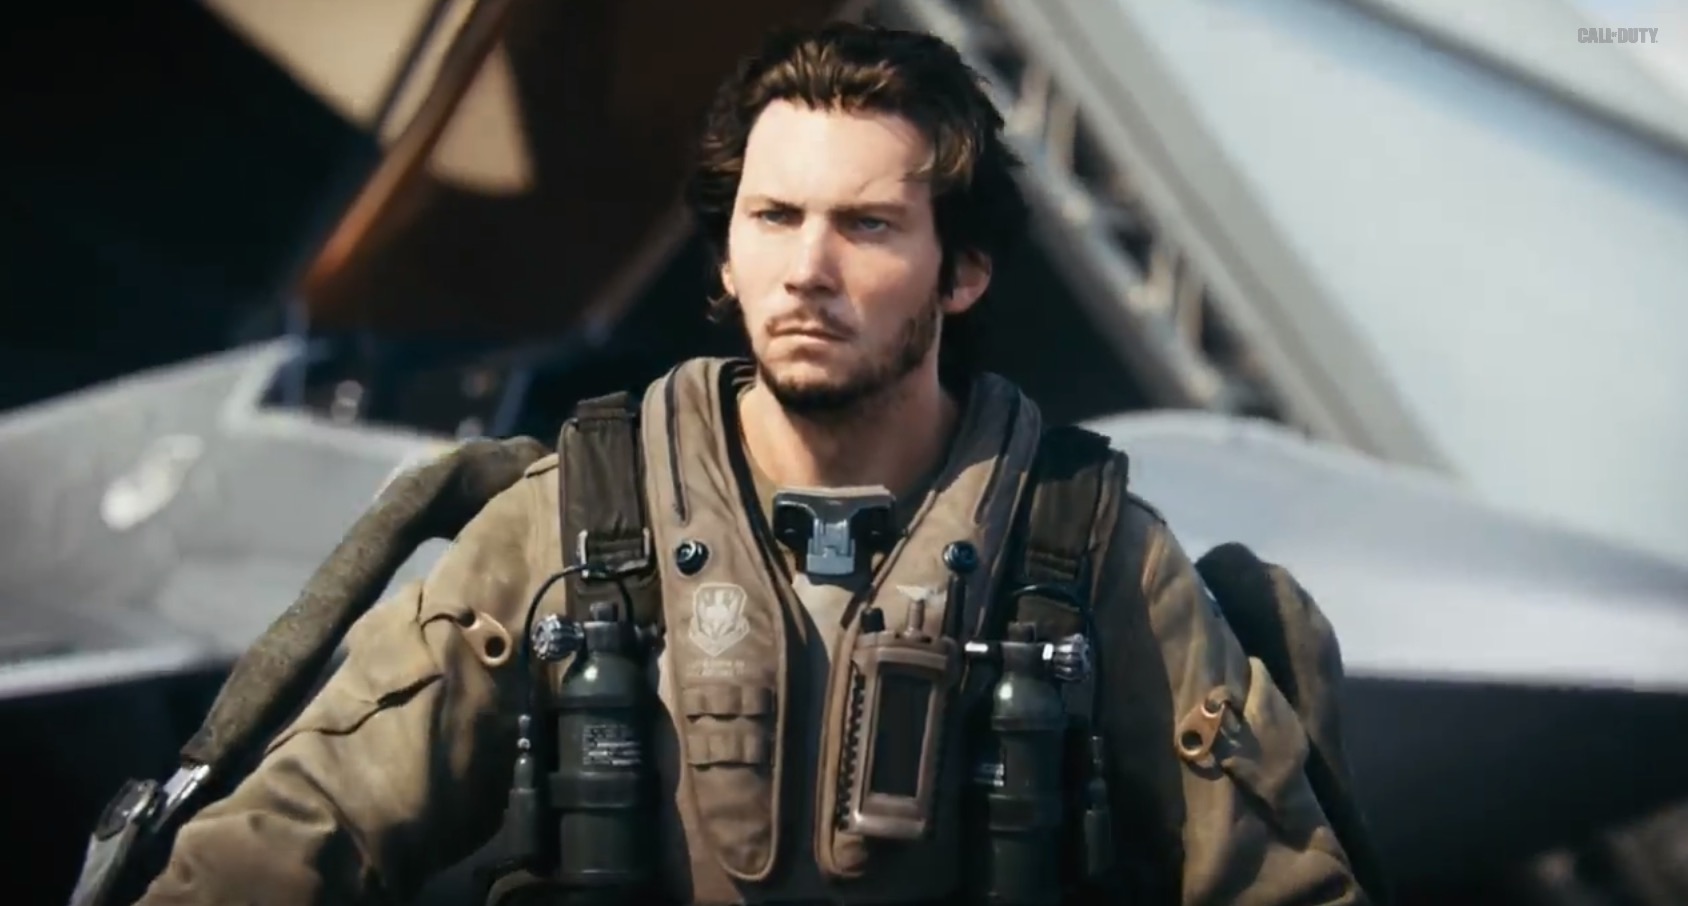 A new Call of Duty: Advanced Warfare ad highlights gameplay and advanced weapons.